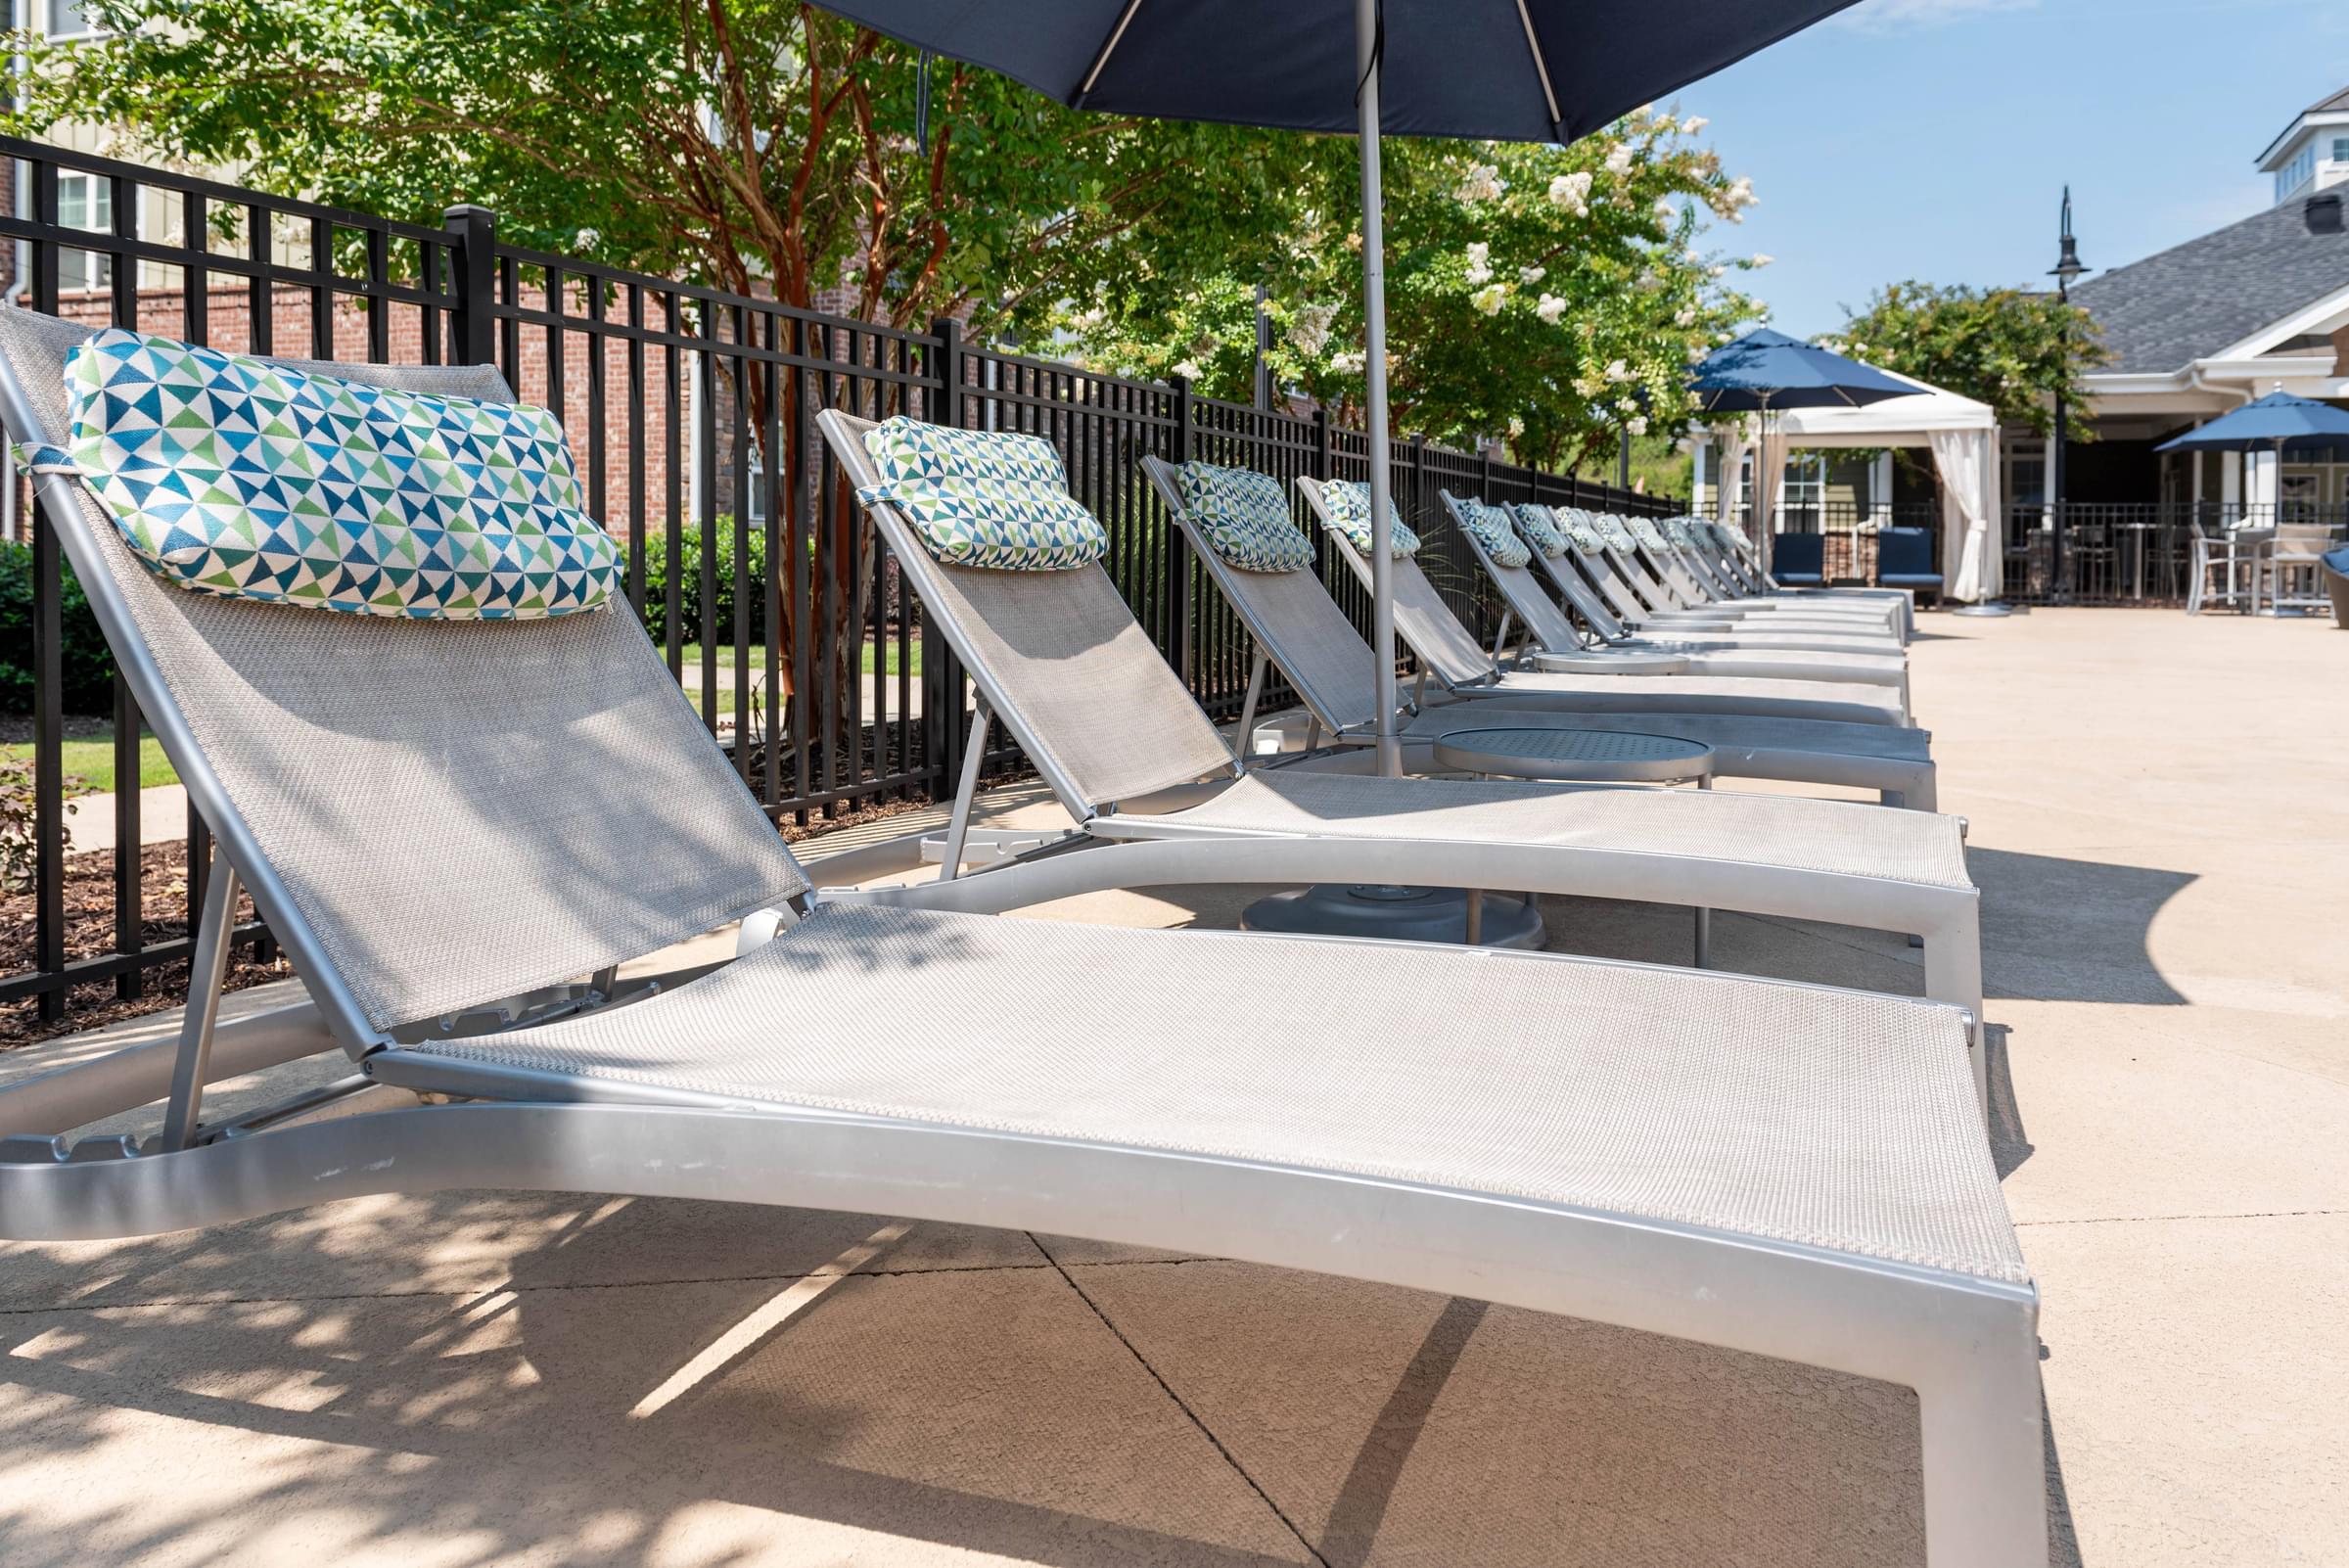 a row of chaise lounges with umbrellas